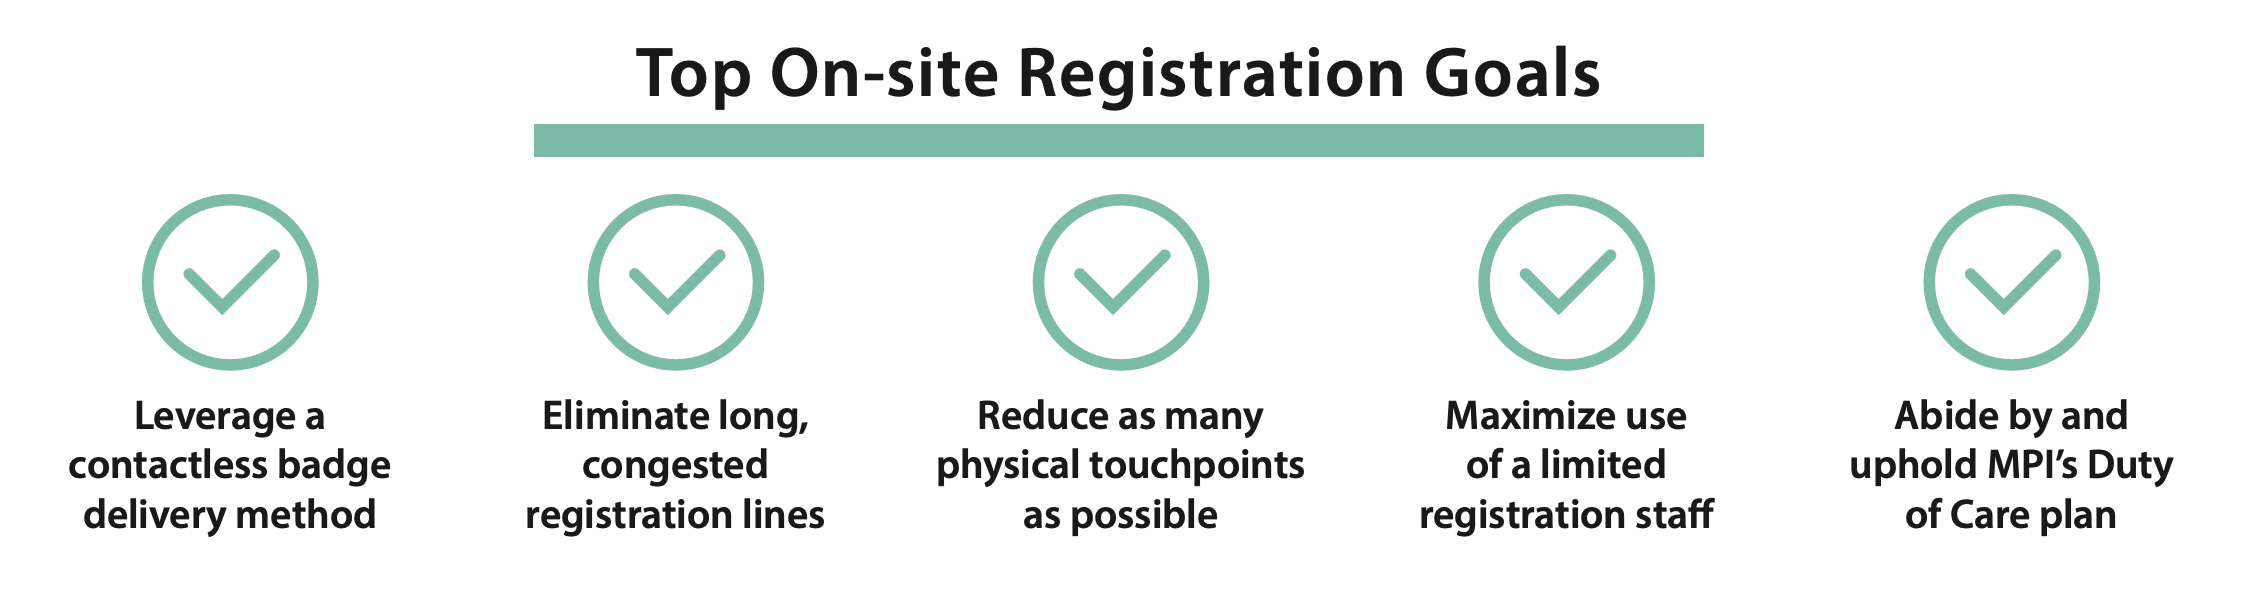 On-site registration goals - leverage a contactless badge delivery method, eliminate long lines, reduce physical touchpoints, maximize use of limited staff, abide by MPI's duty of care plan